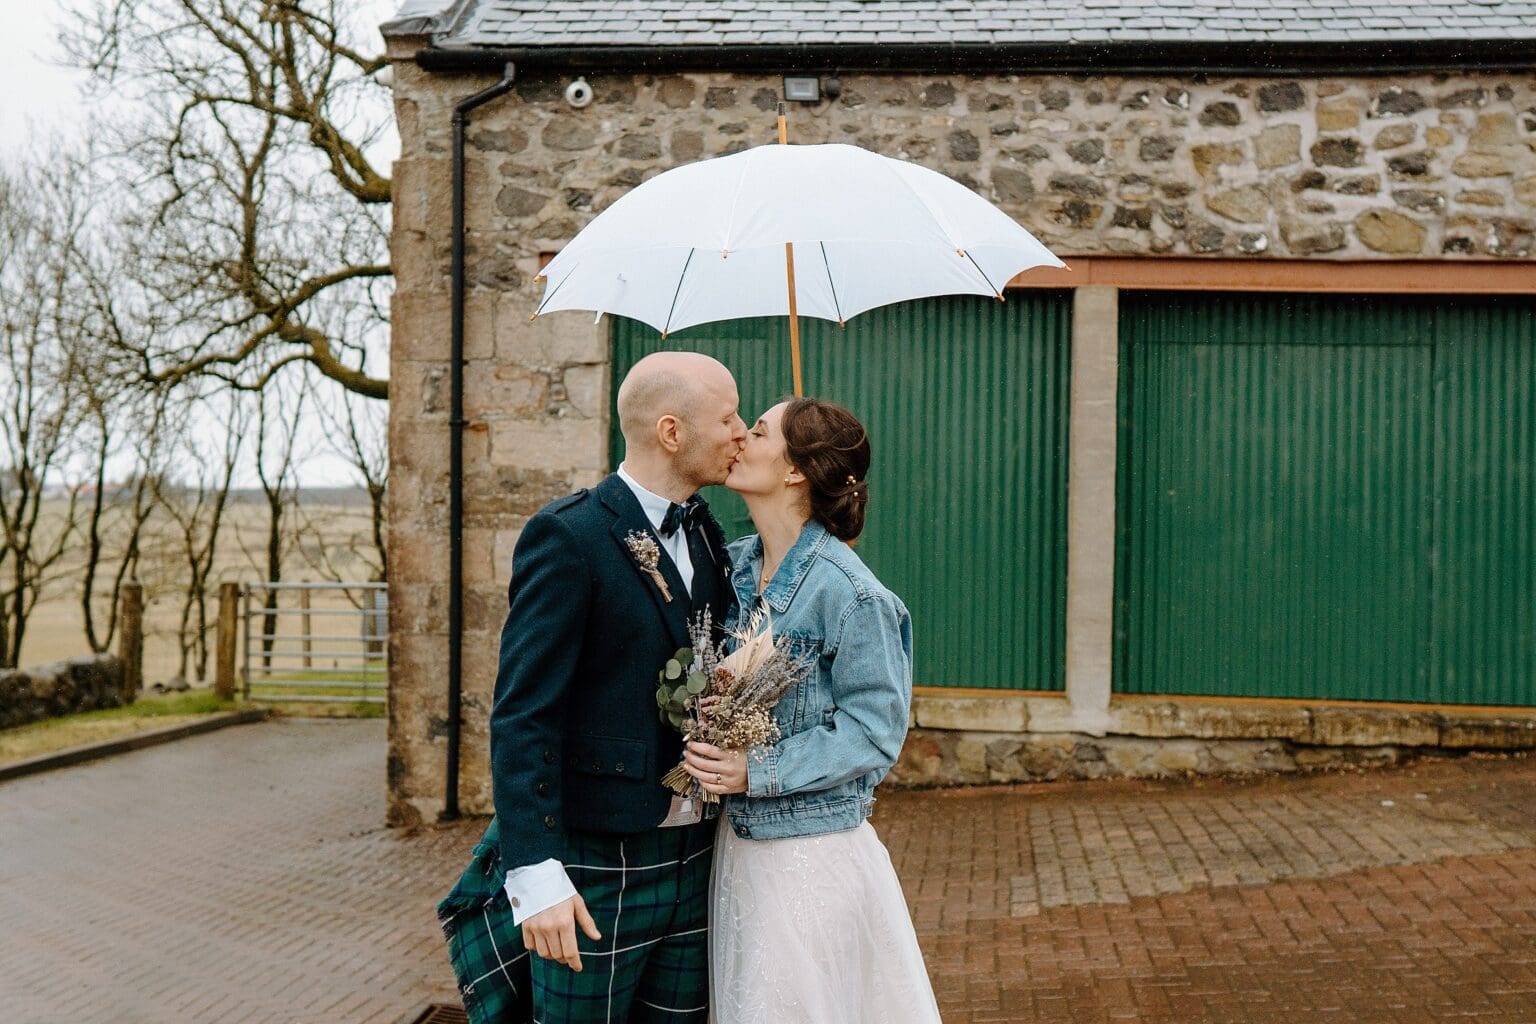 the bride is wearing a blue denim jacket and holding her dried flower bouquet as she kisses the groom underneath a white umbrella outside their farm wedding venues scotland